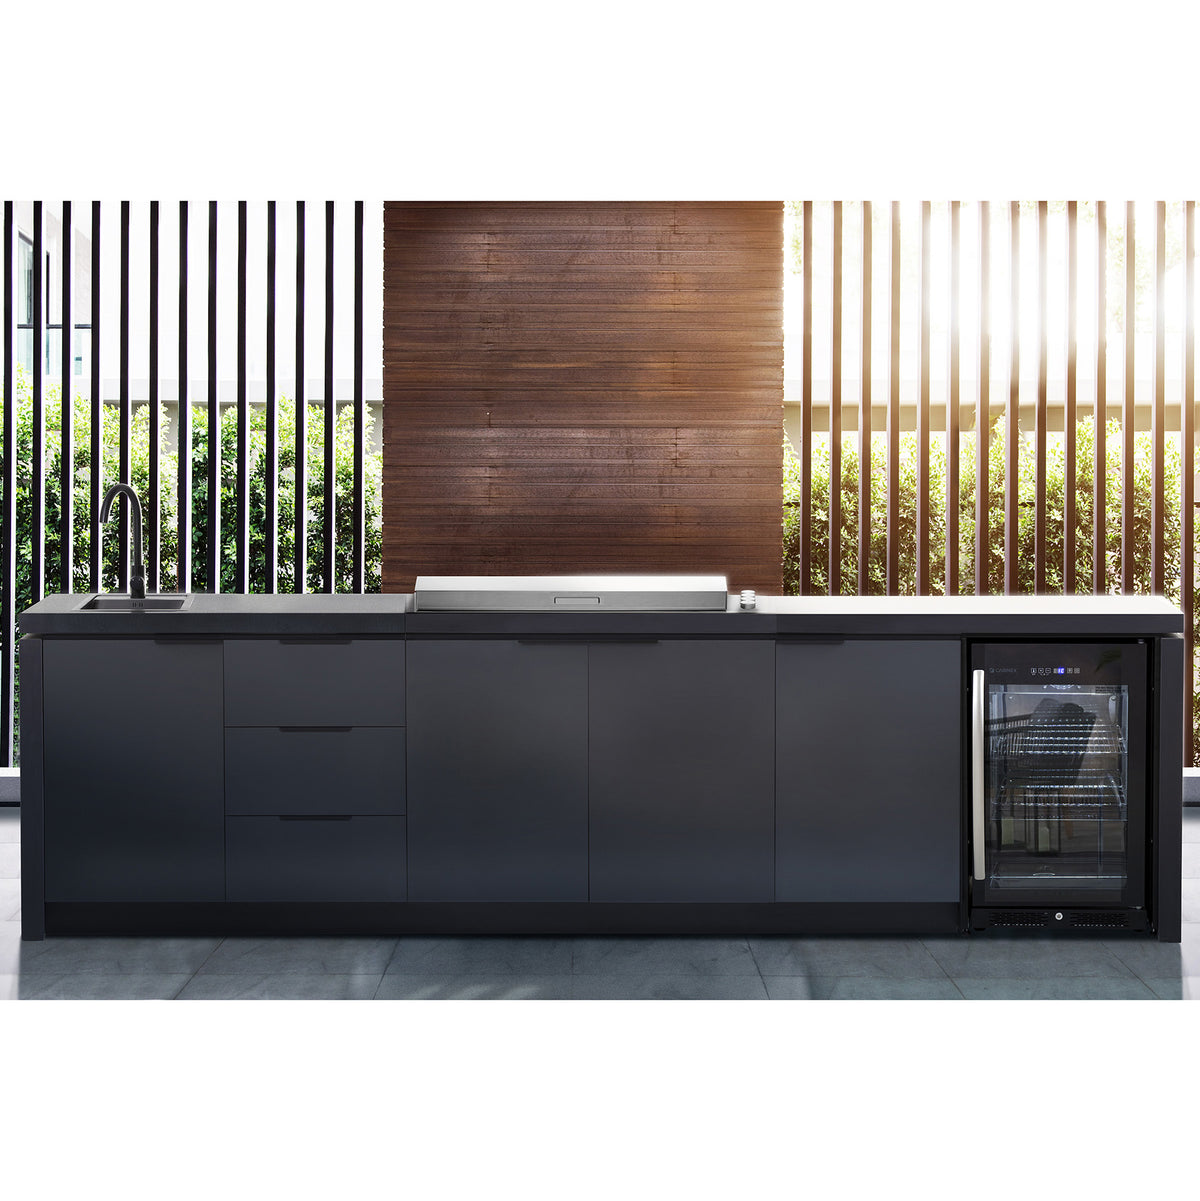 BeefEater 6 Burner Premium Cabinex with Proline Flat Lid Barbecue and Fridge